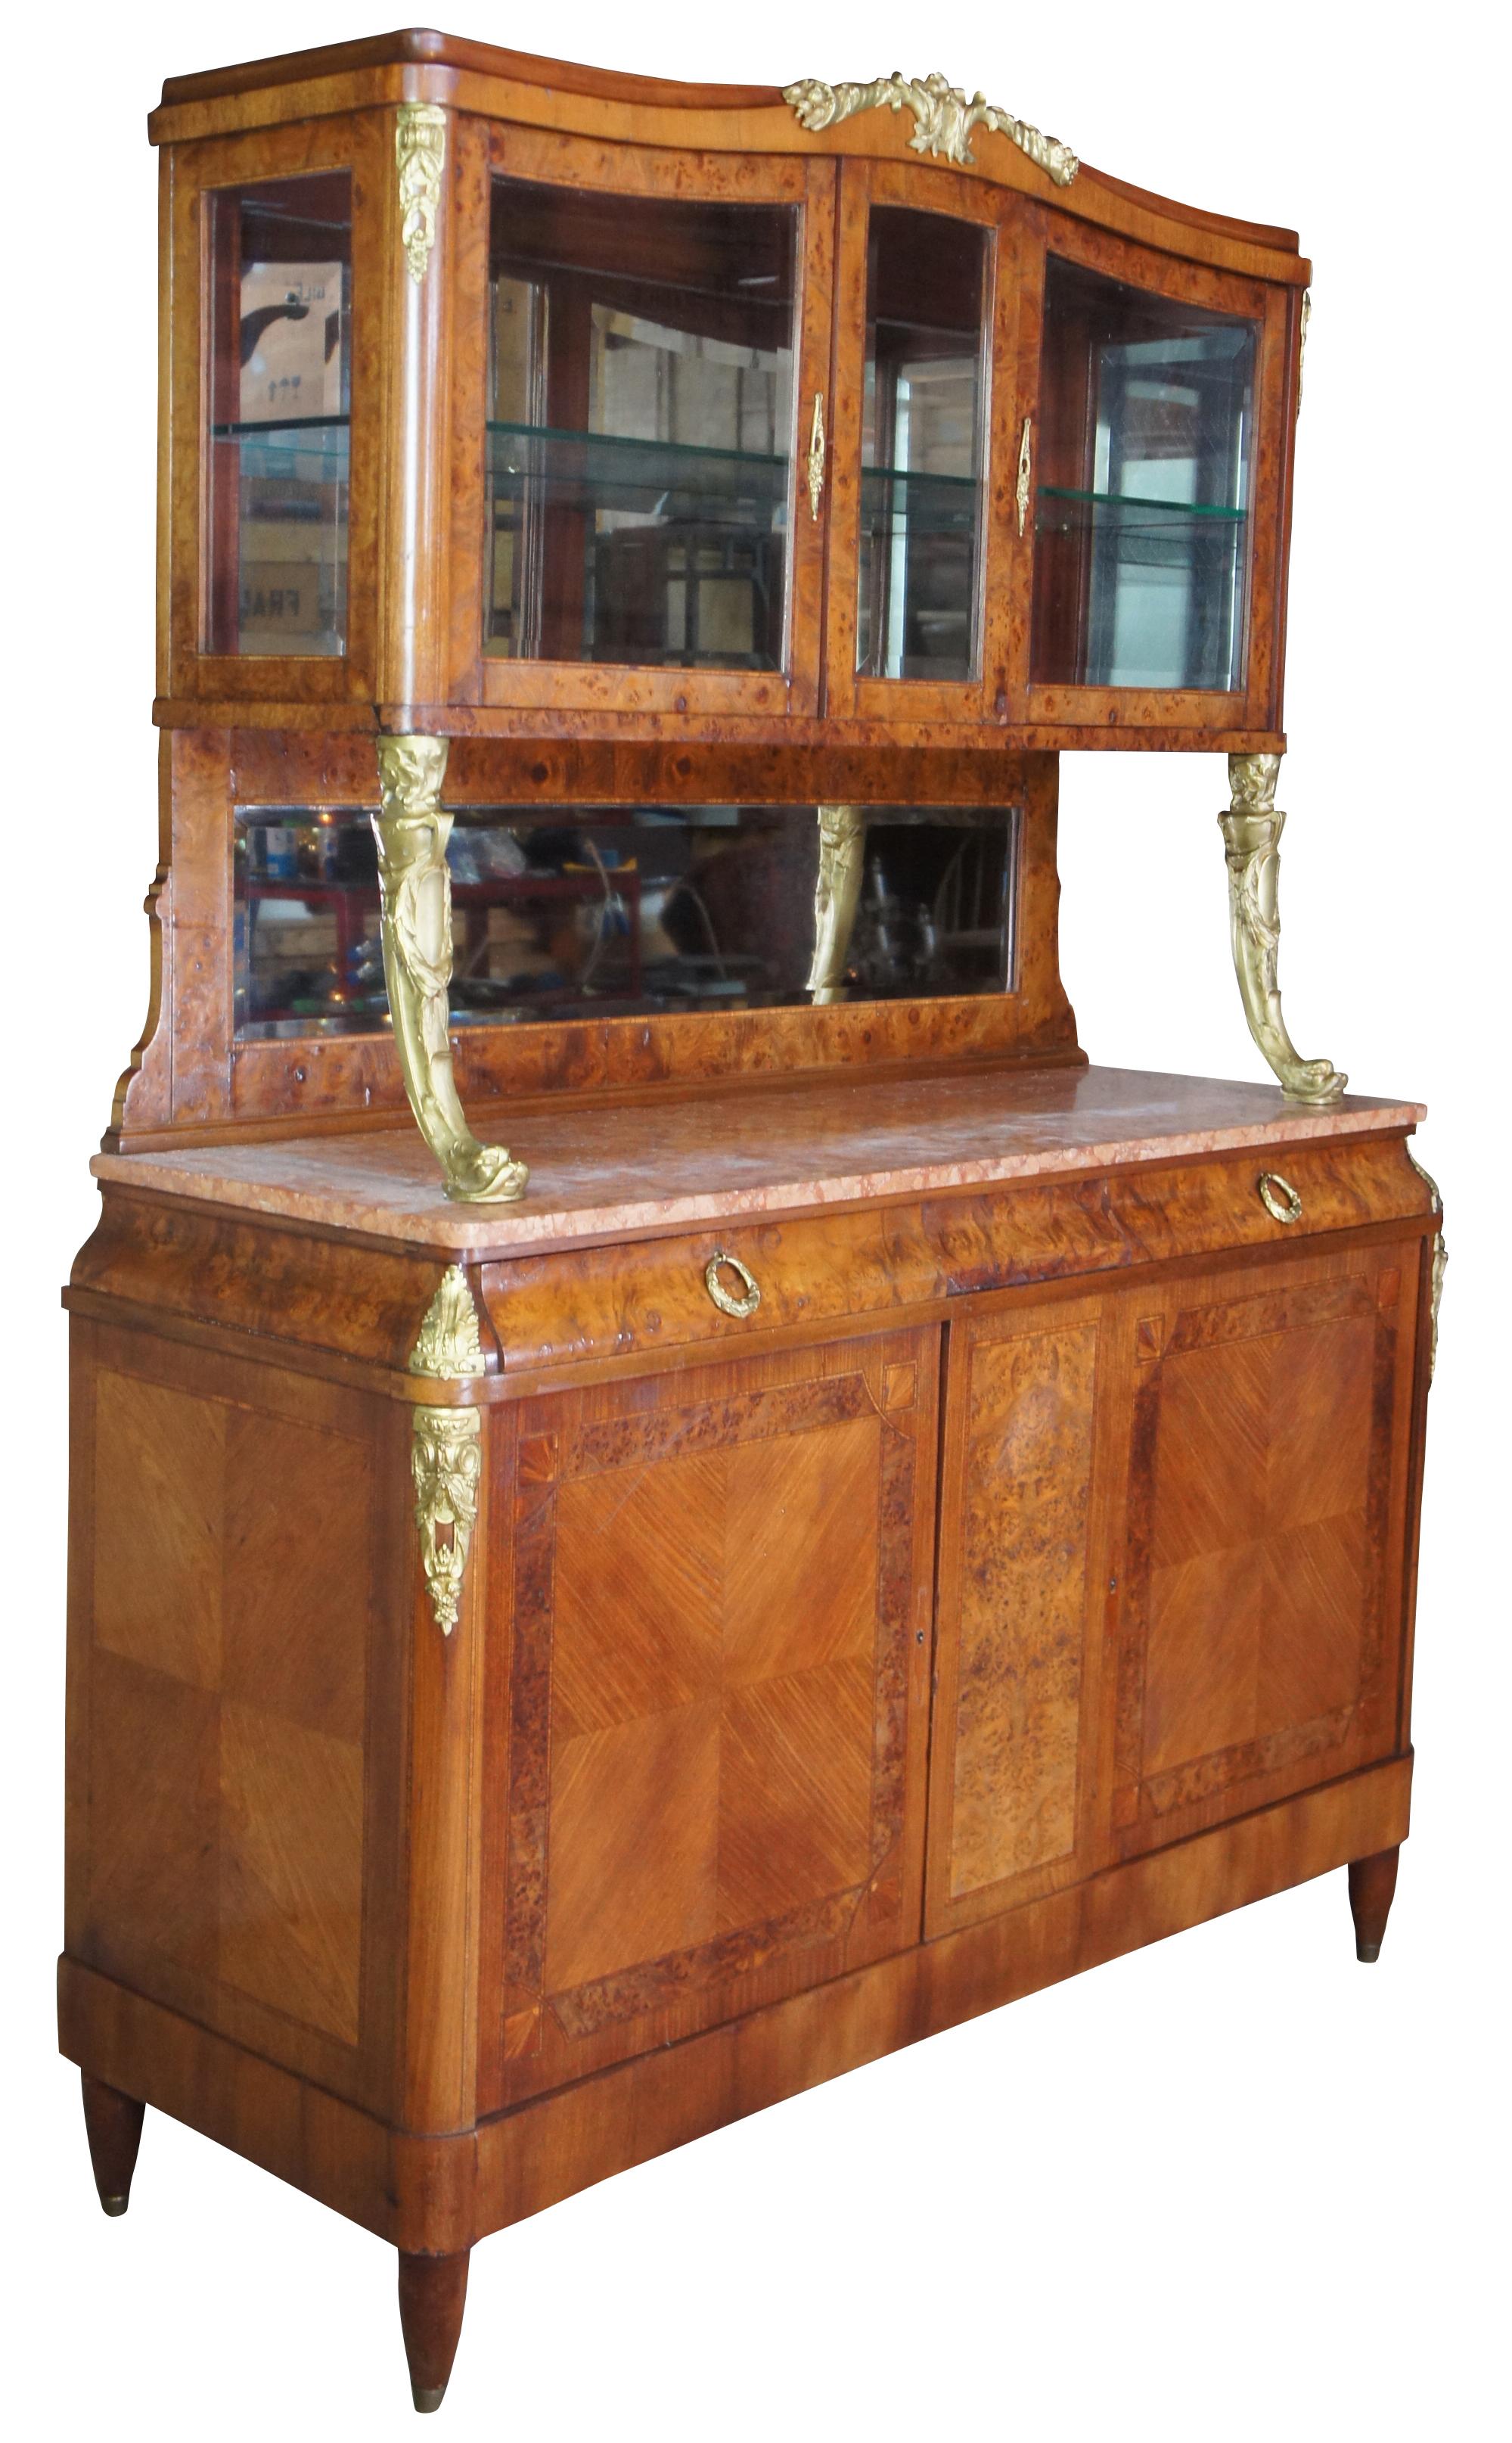 Beautiful walnut burr sideboard. Features a travertine top with bronze delphin mounts that steps up into the cupboard portion of the cabinet. The top includes a glass shelf for storage and a mirroed backing for display. The cabinet is adorned with